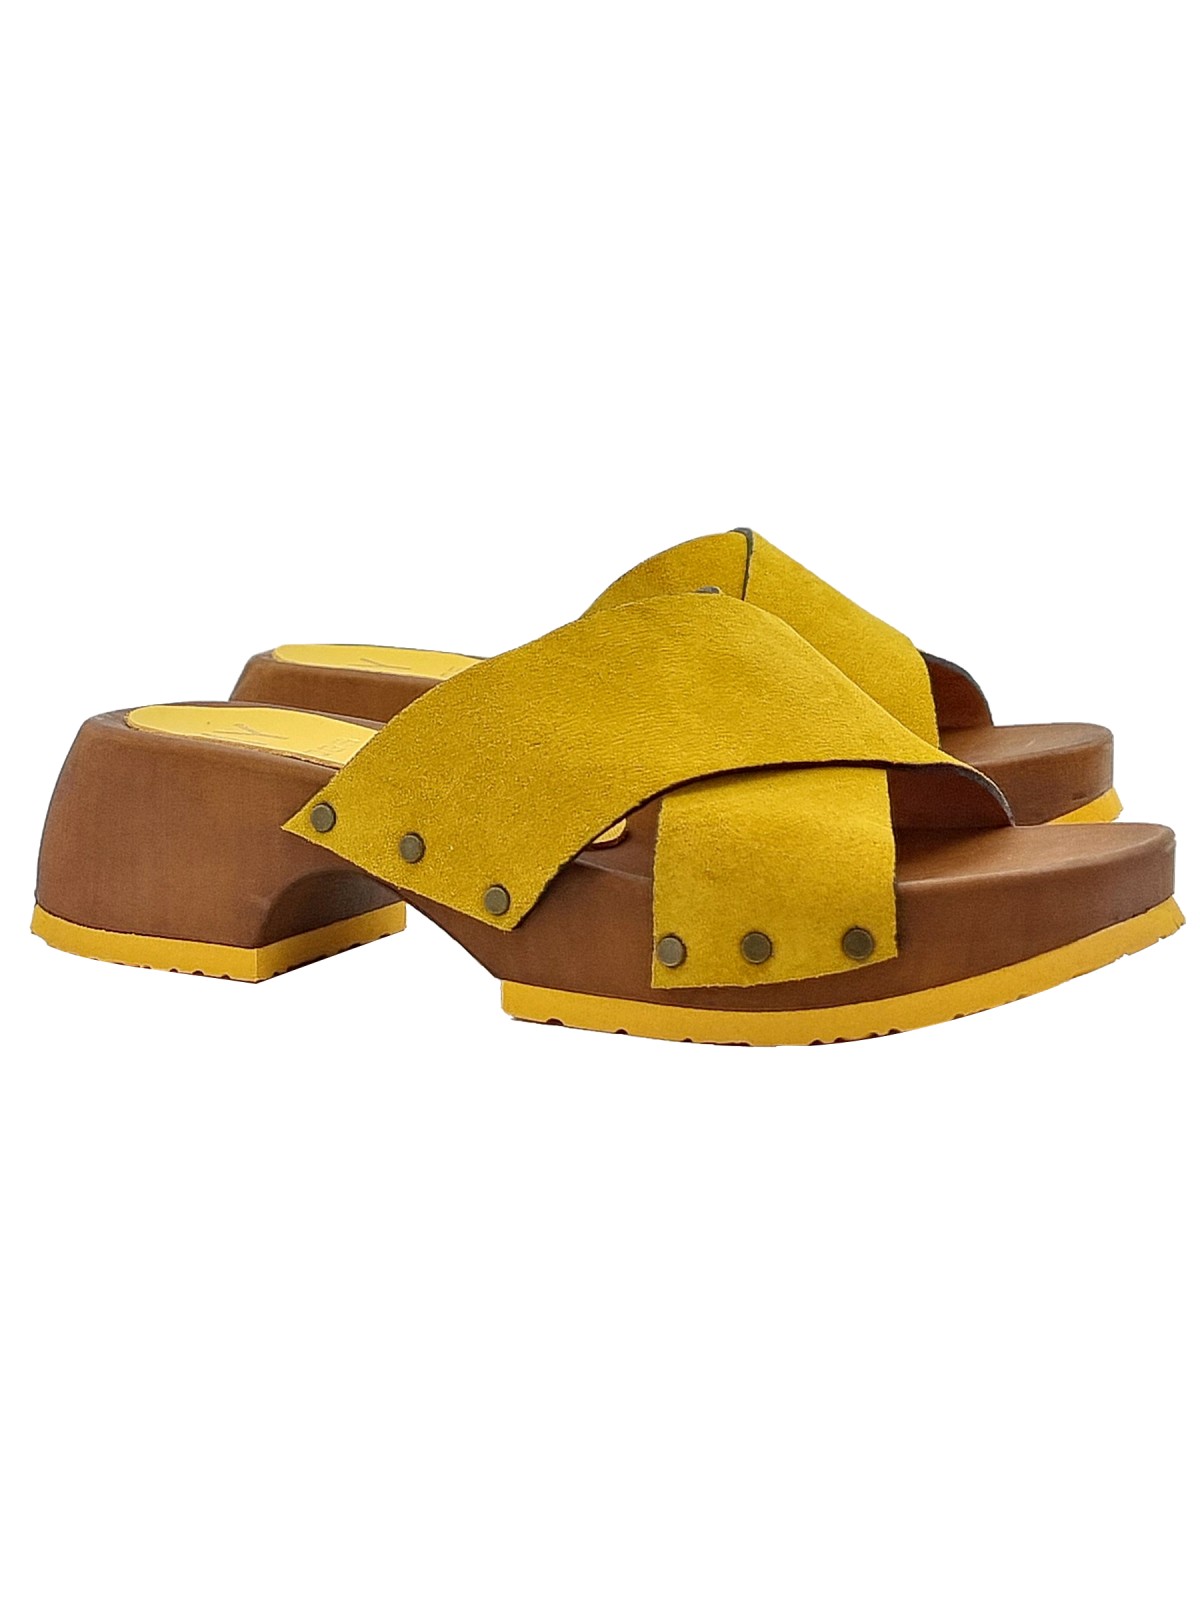 LOW YELLOW SUEDE CLOGS WITH CROSSED BANDS